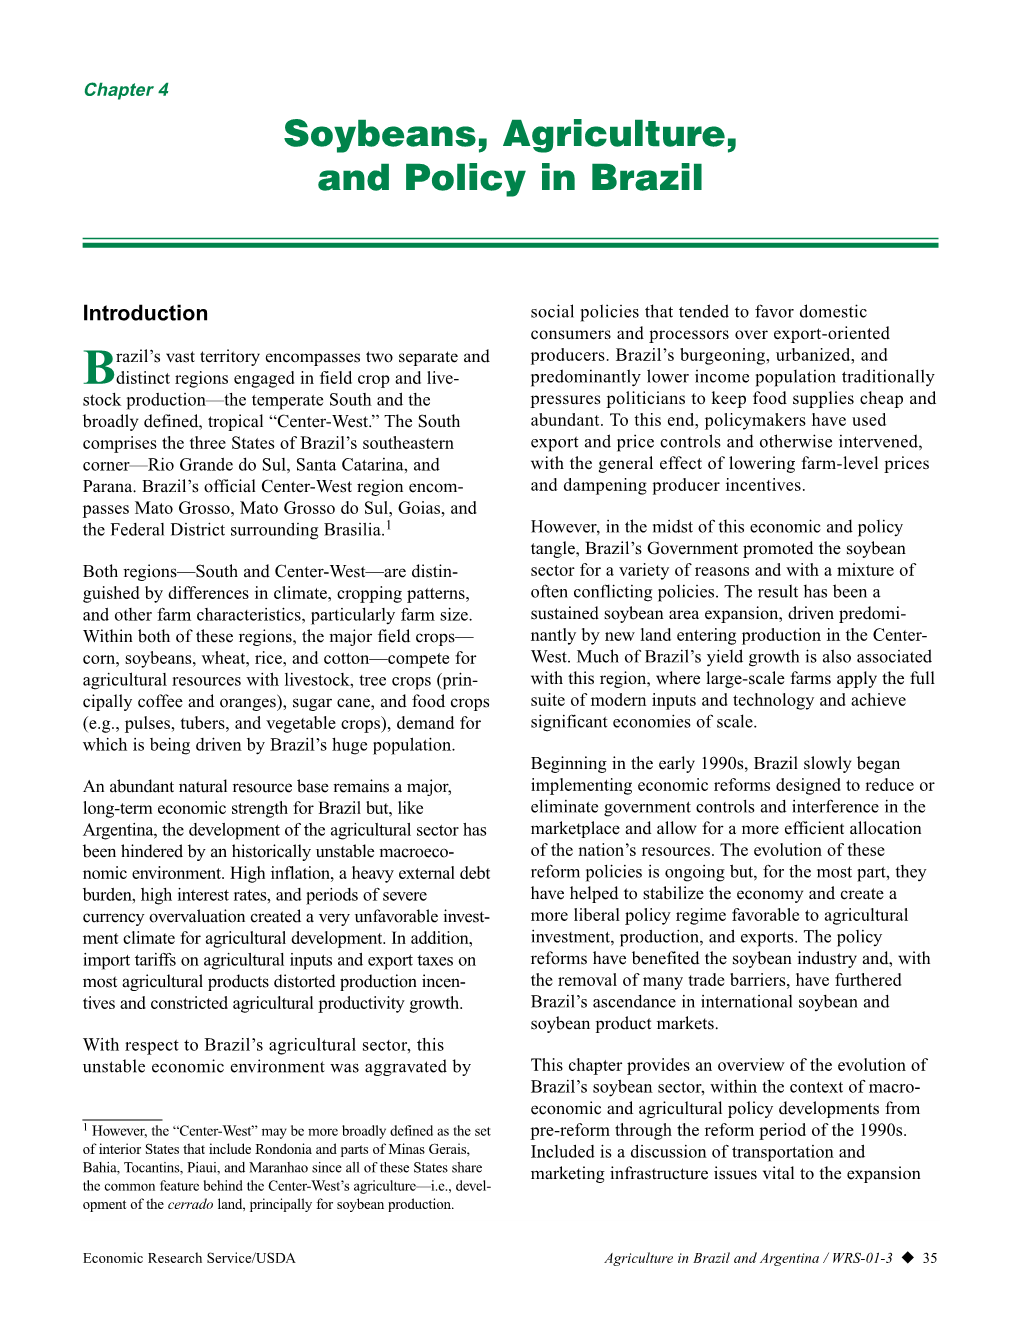 Soybeans, Agriculture, and Policy in Brazil